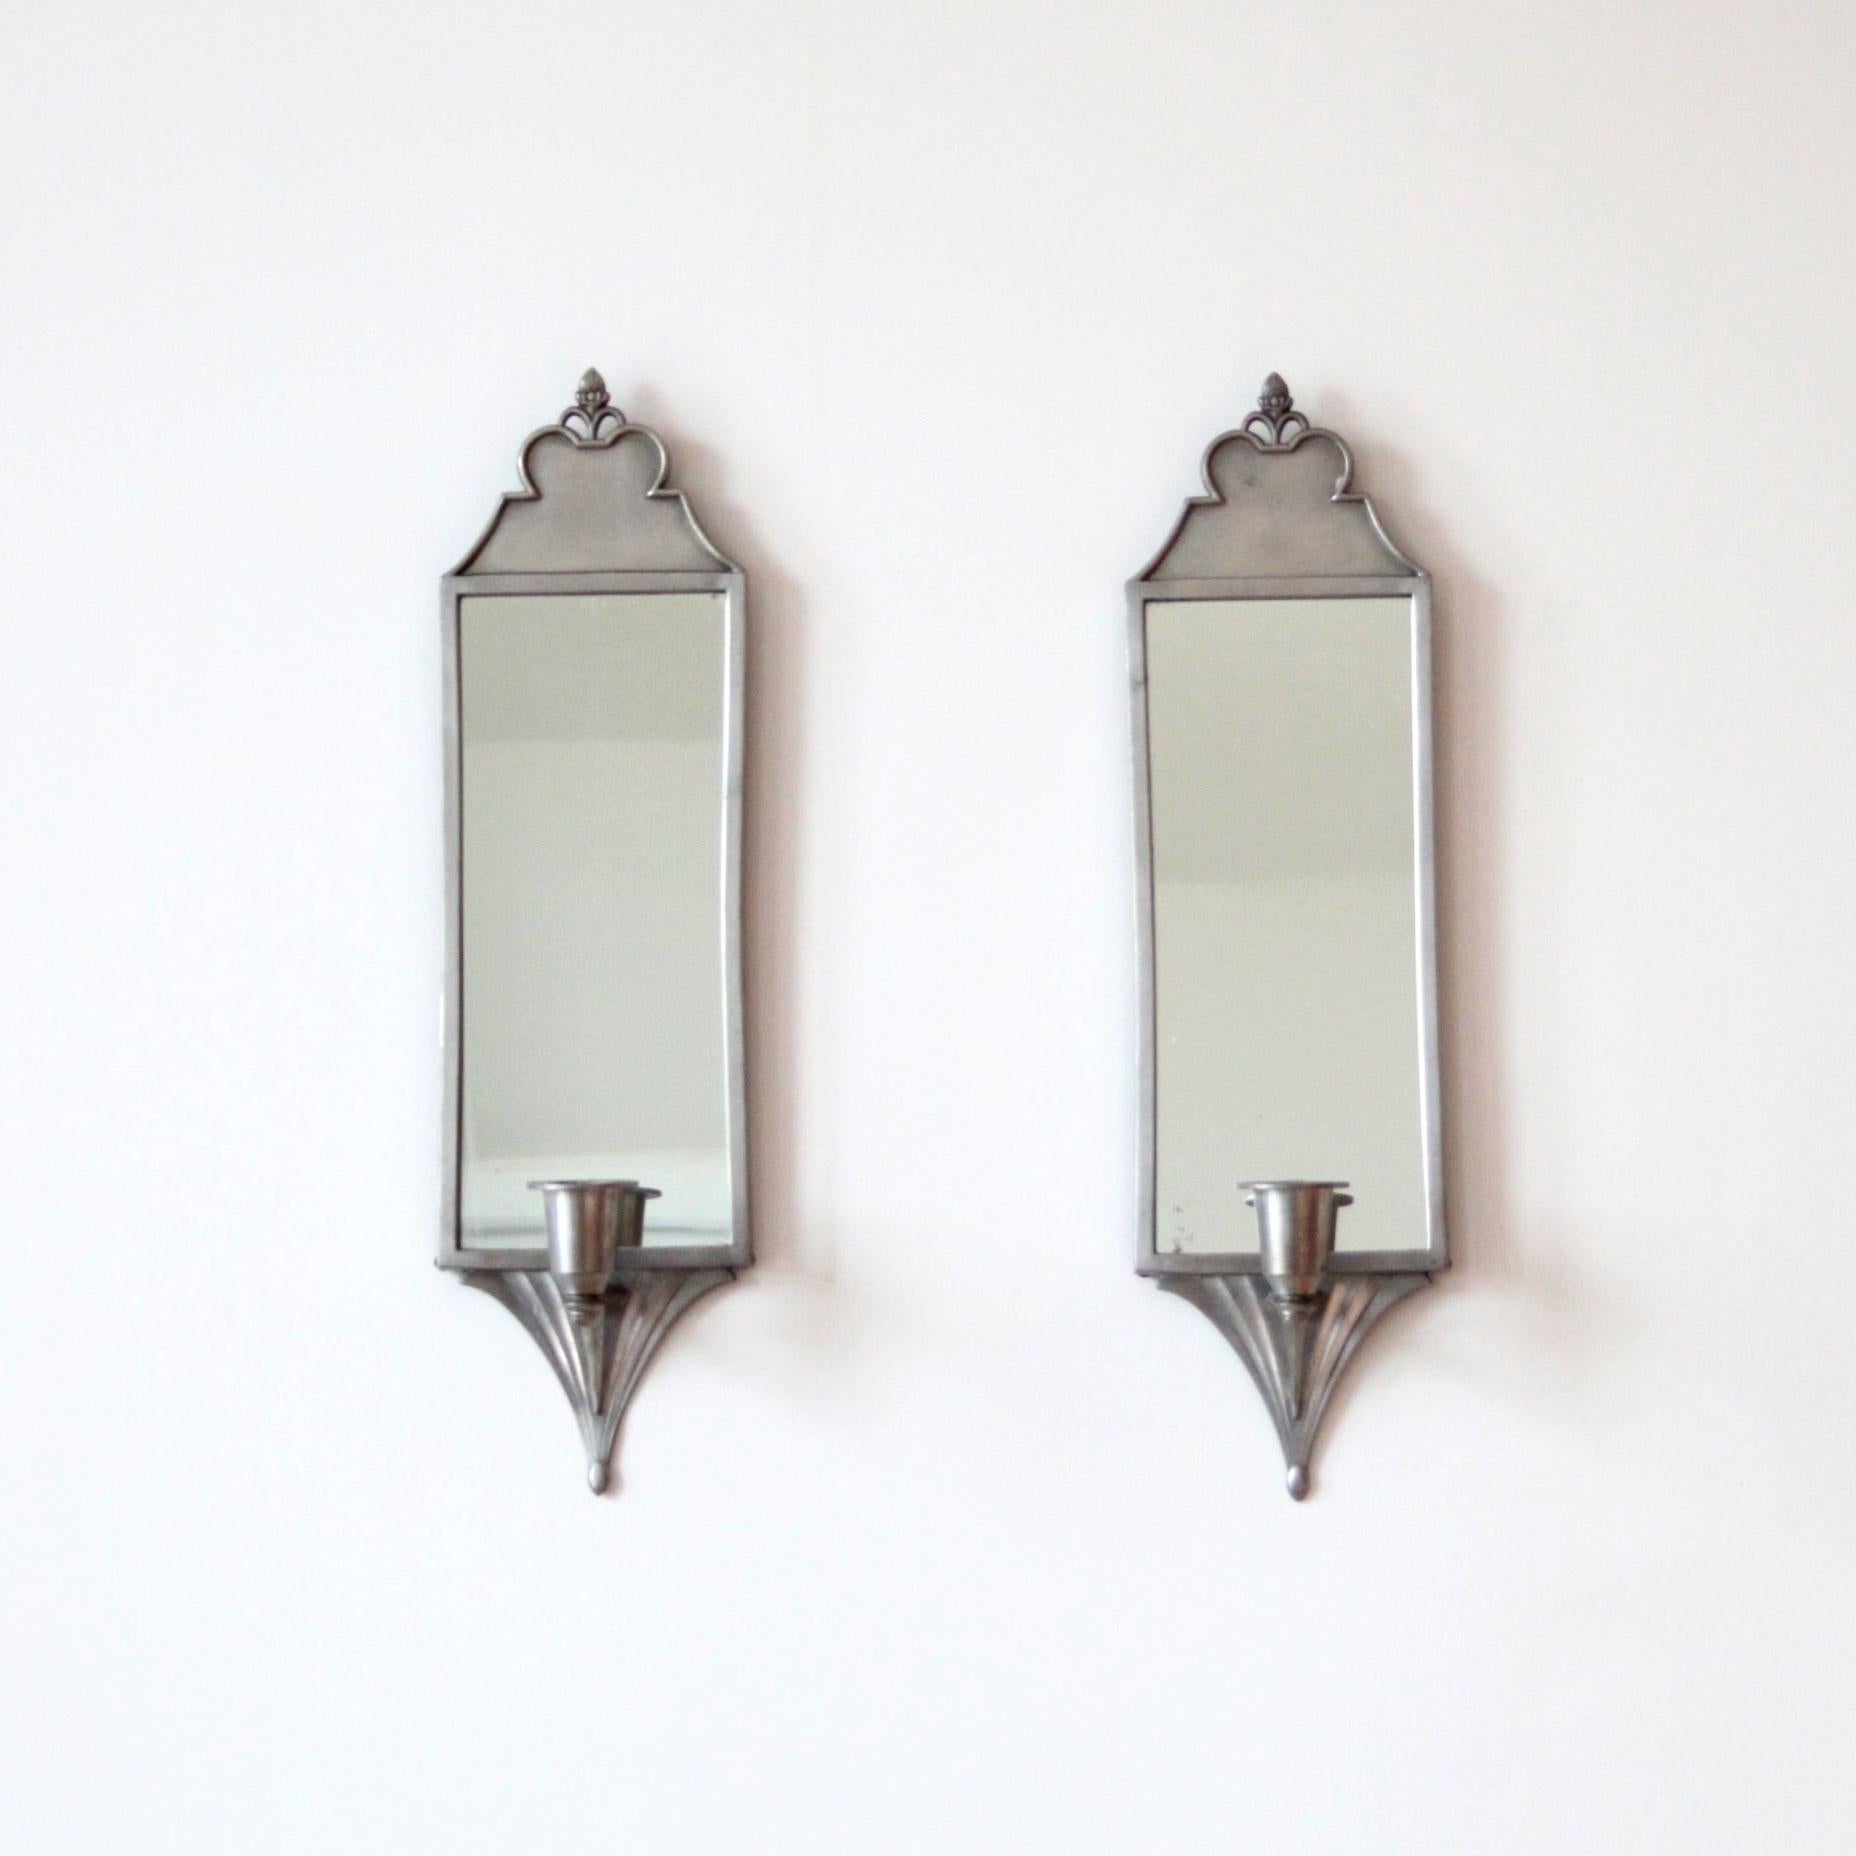 Art Deco Pair of Just Andersen Candle Sconces in Pewter, Denmark 1918-1929